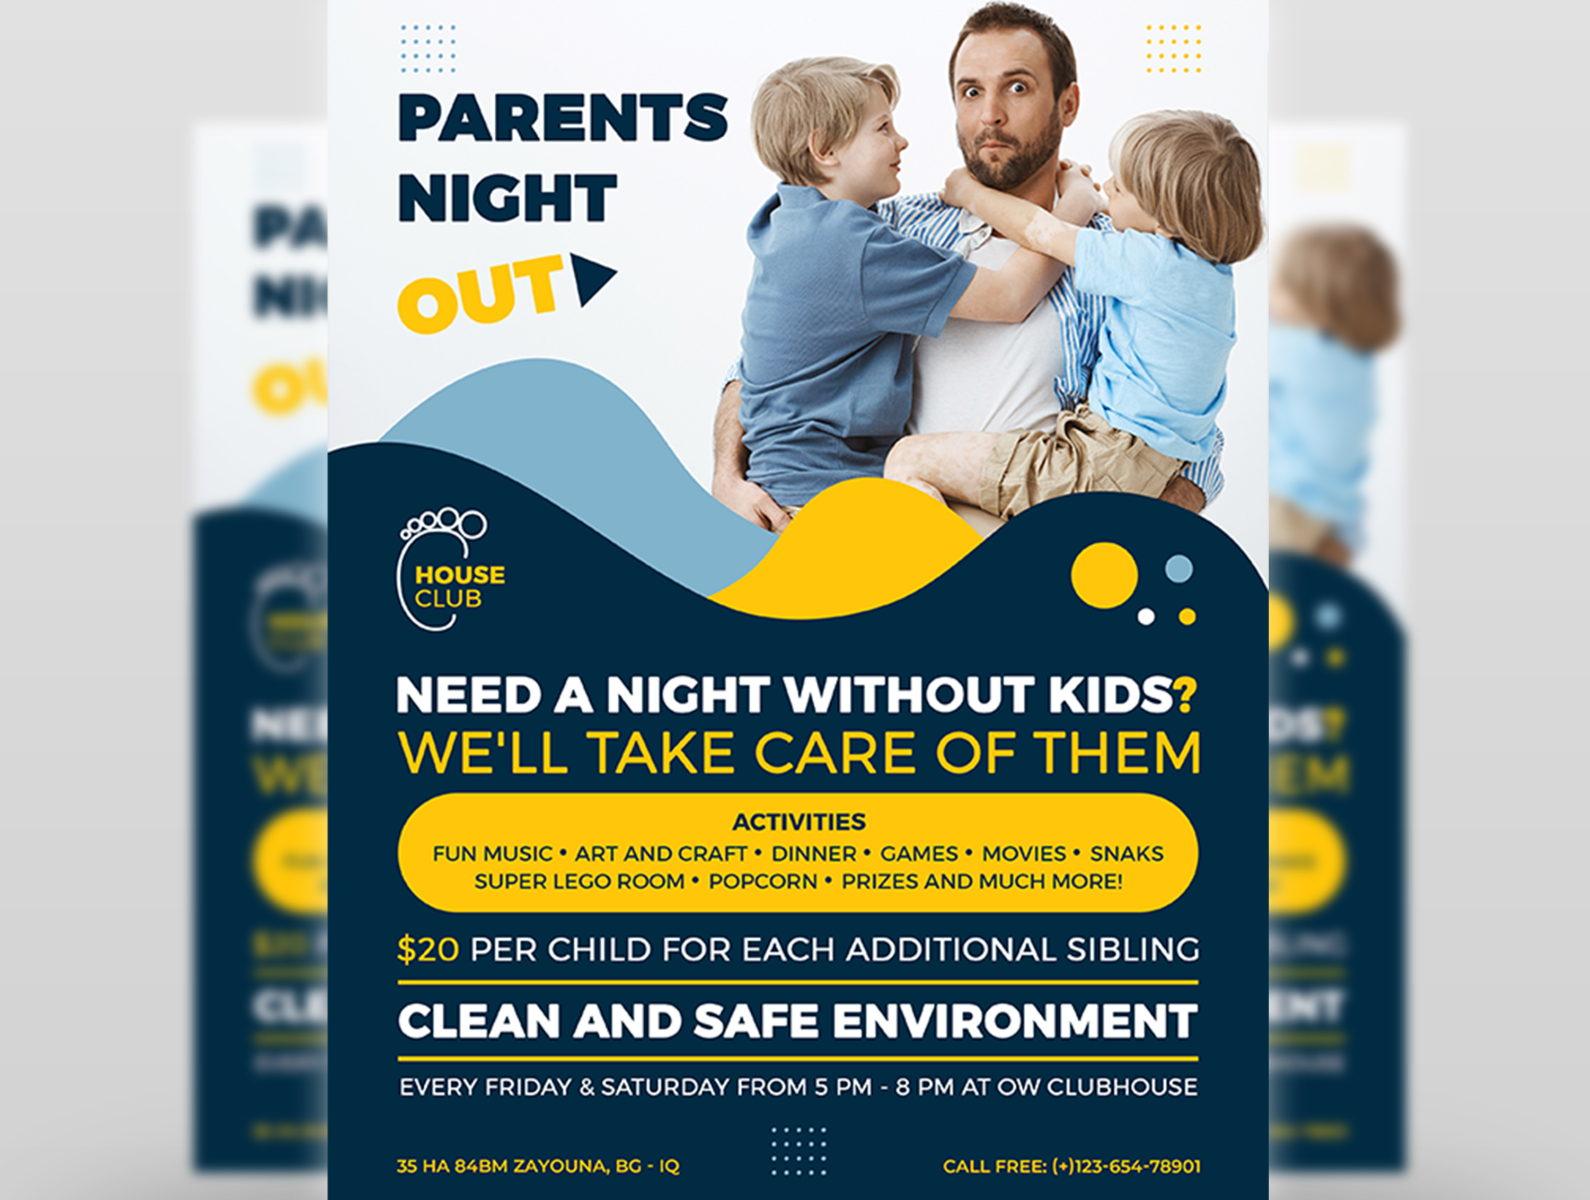 Parents Night Out Flyer Template by OWPictures on Dribbble